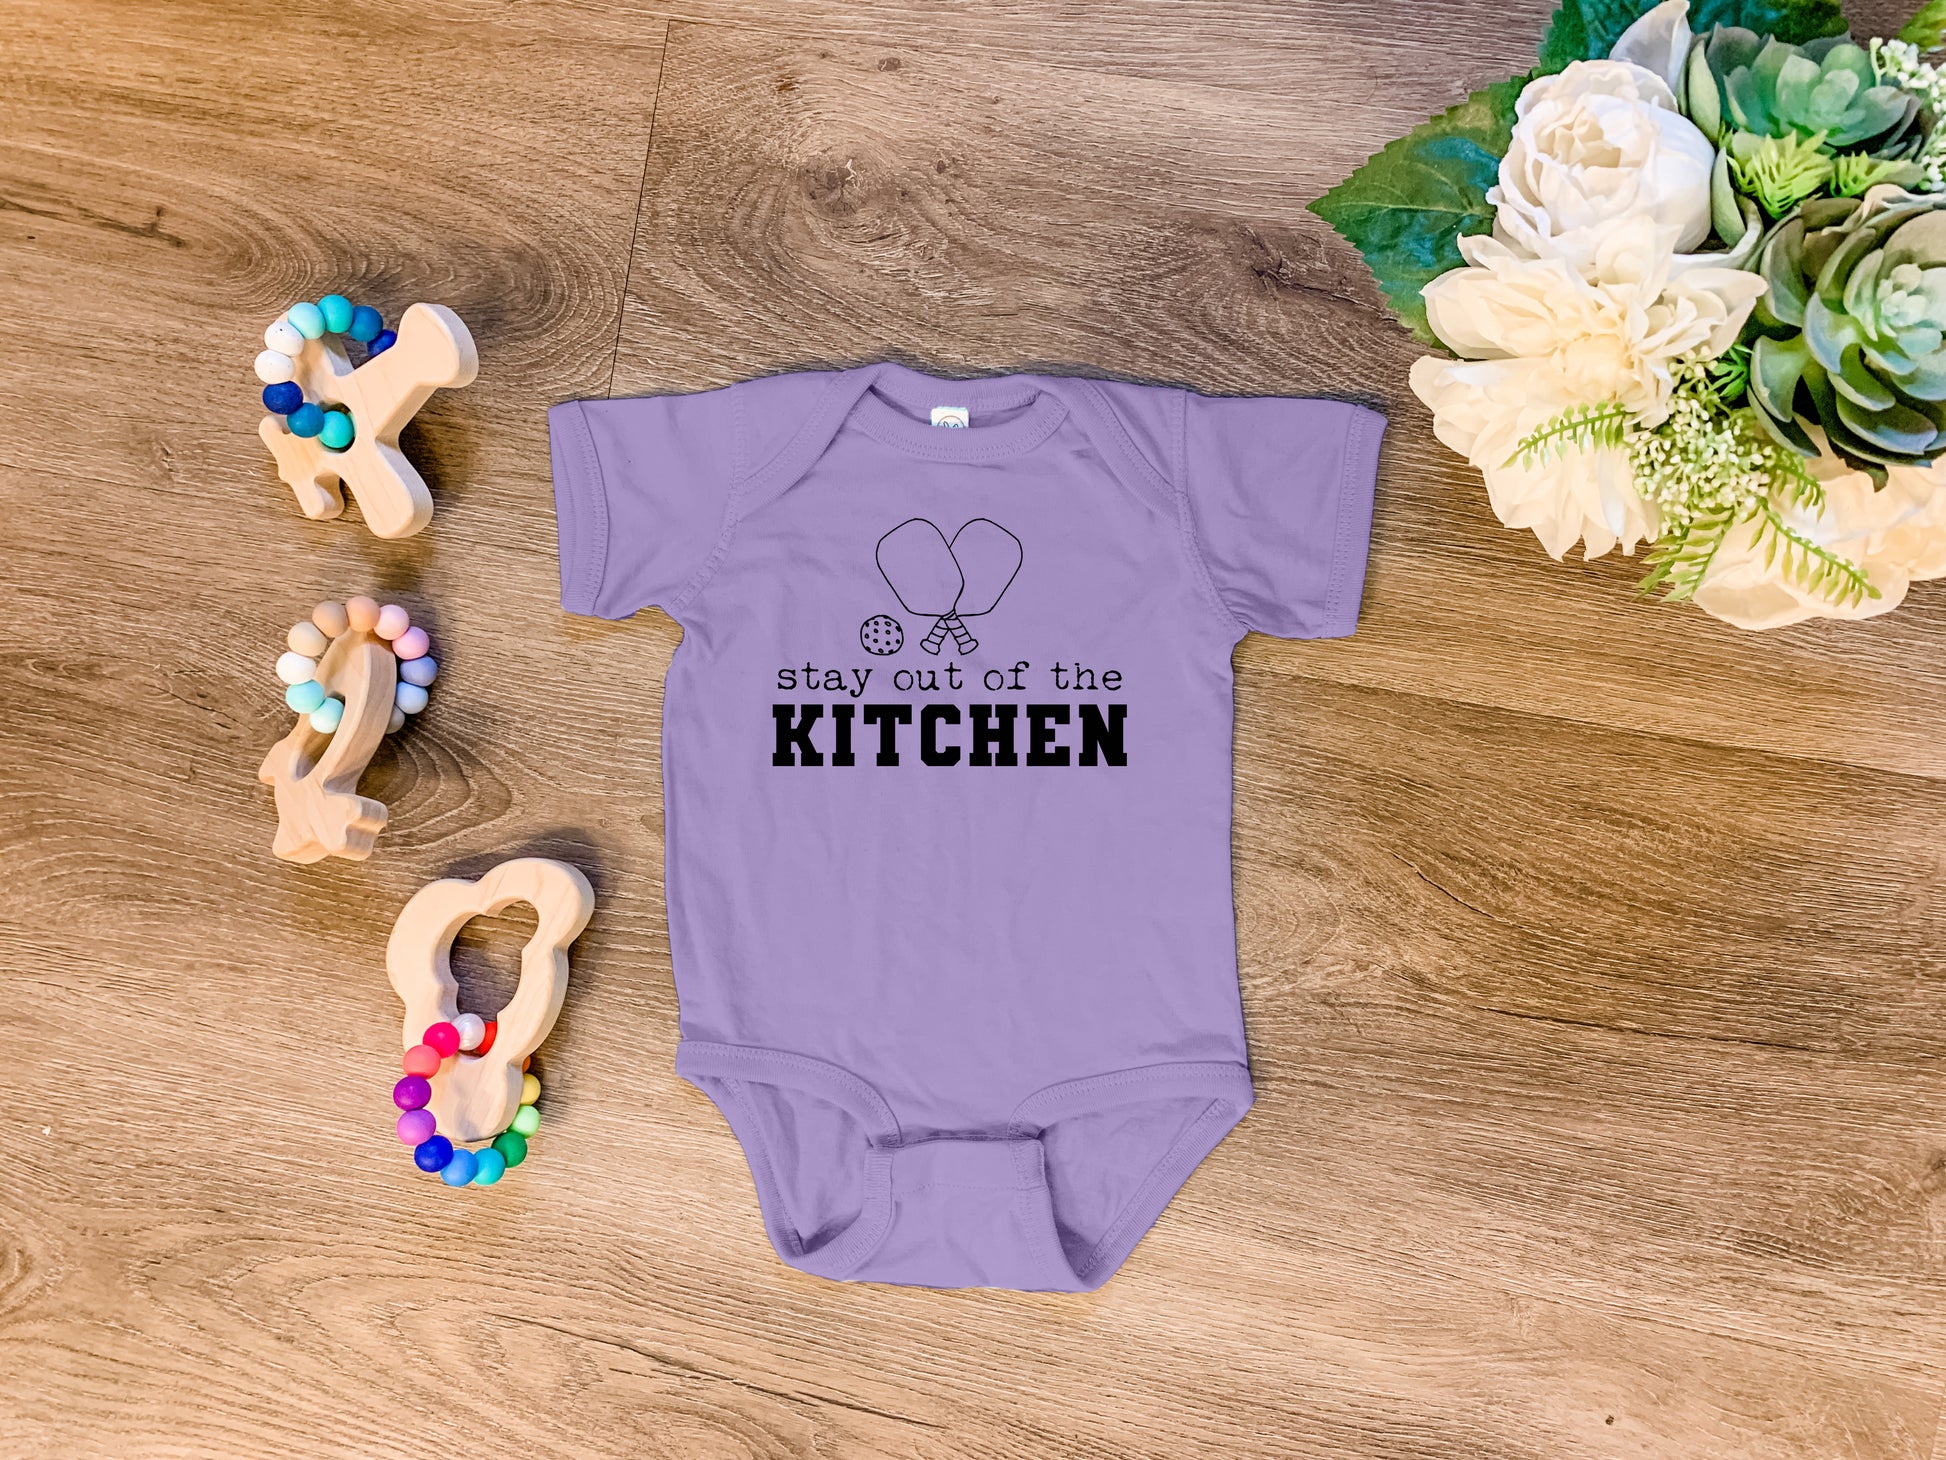 a purple onesuit with the words stay out of the kitchen on it next to